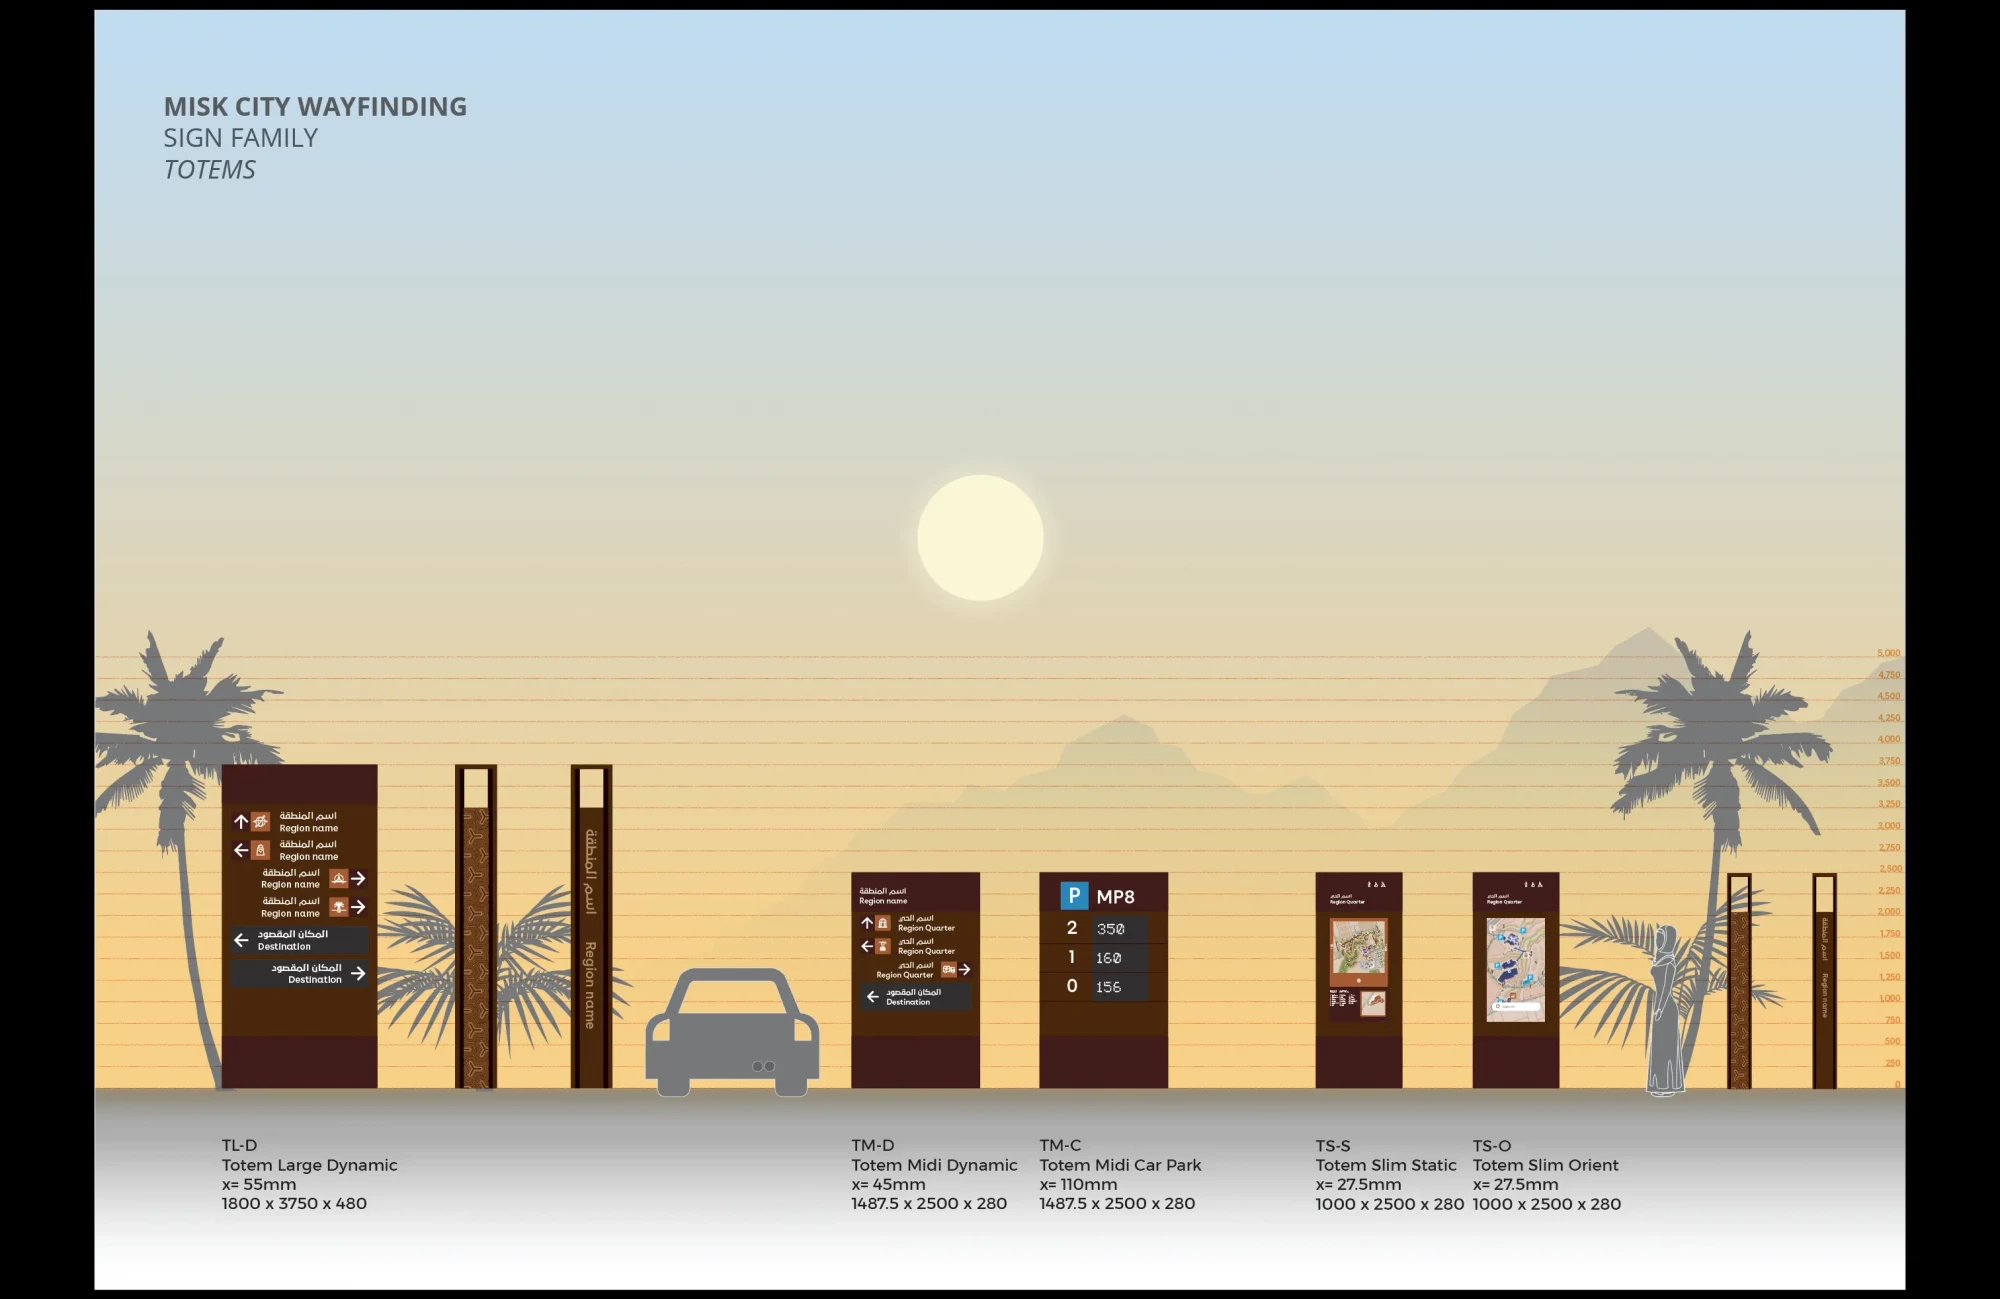 Render of the wayfinding 'family' of totems and signposts